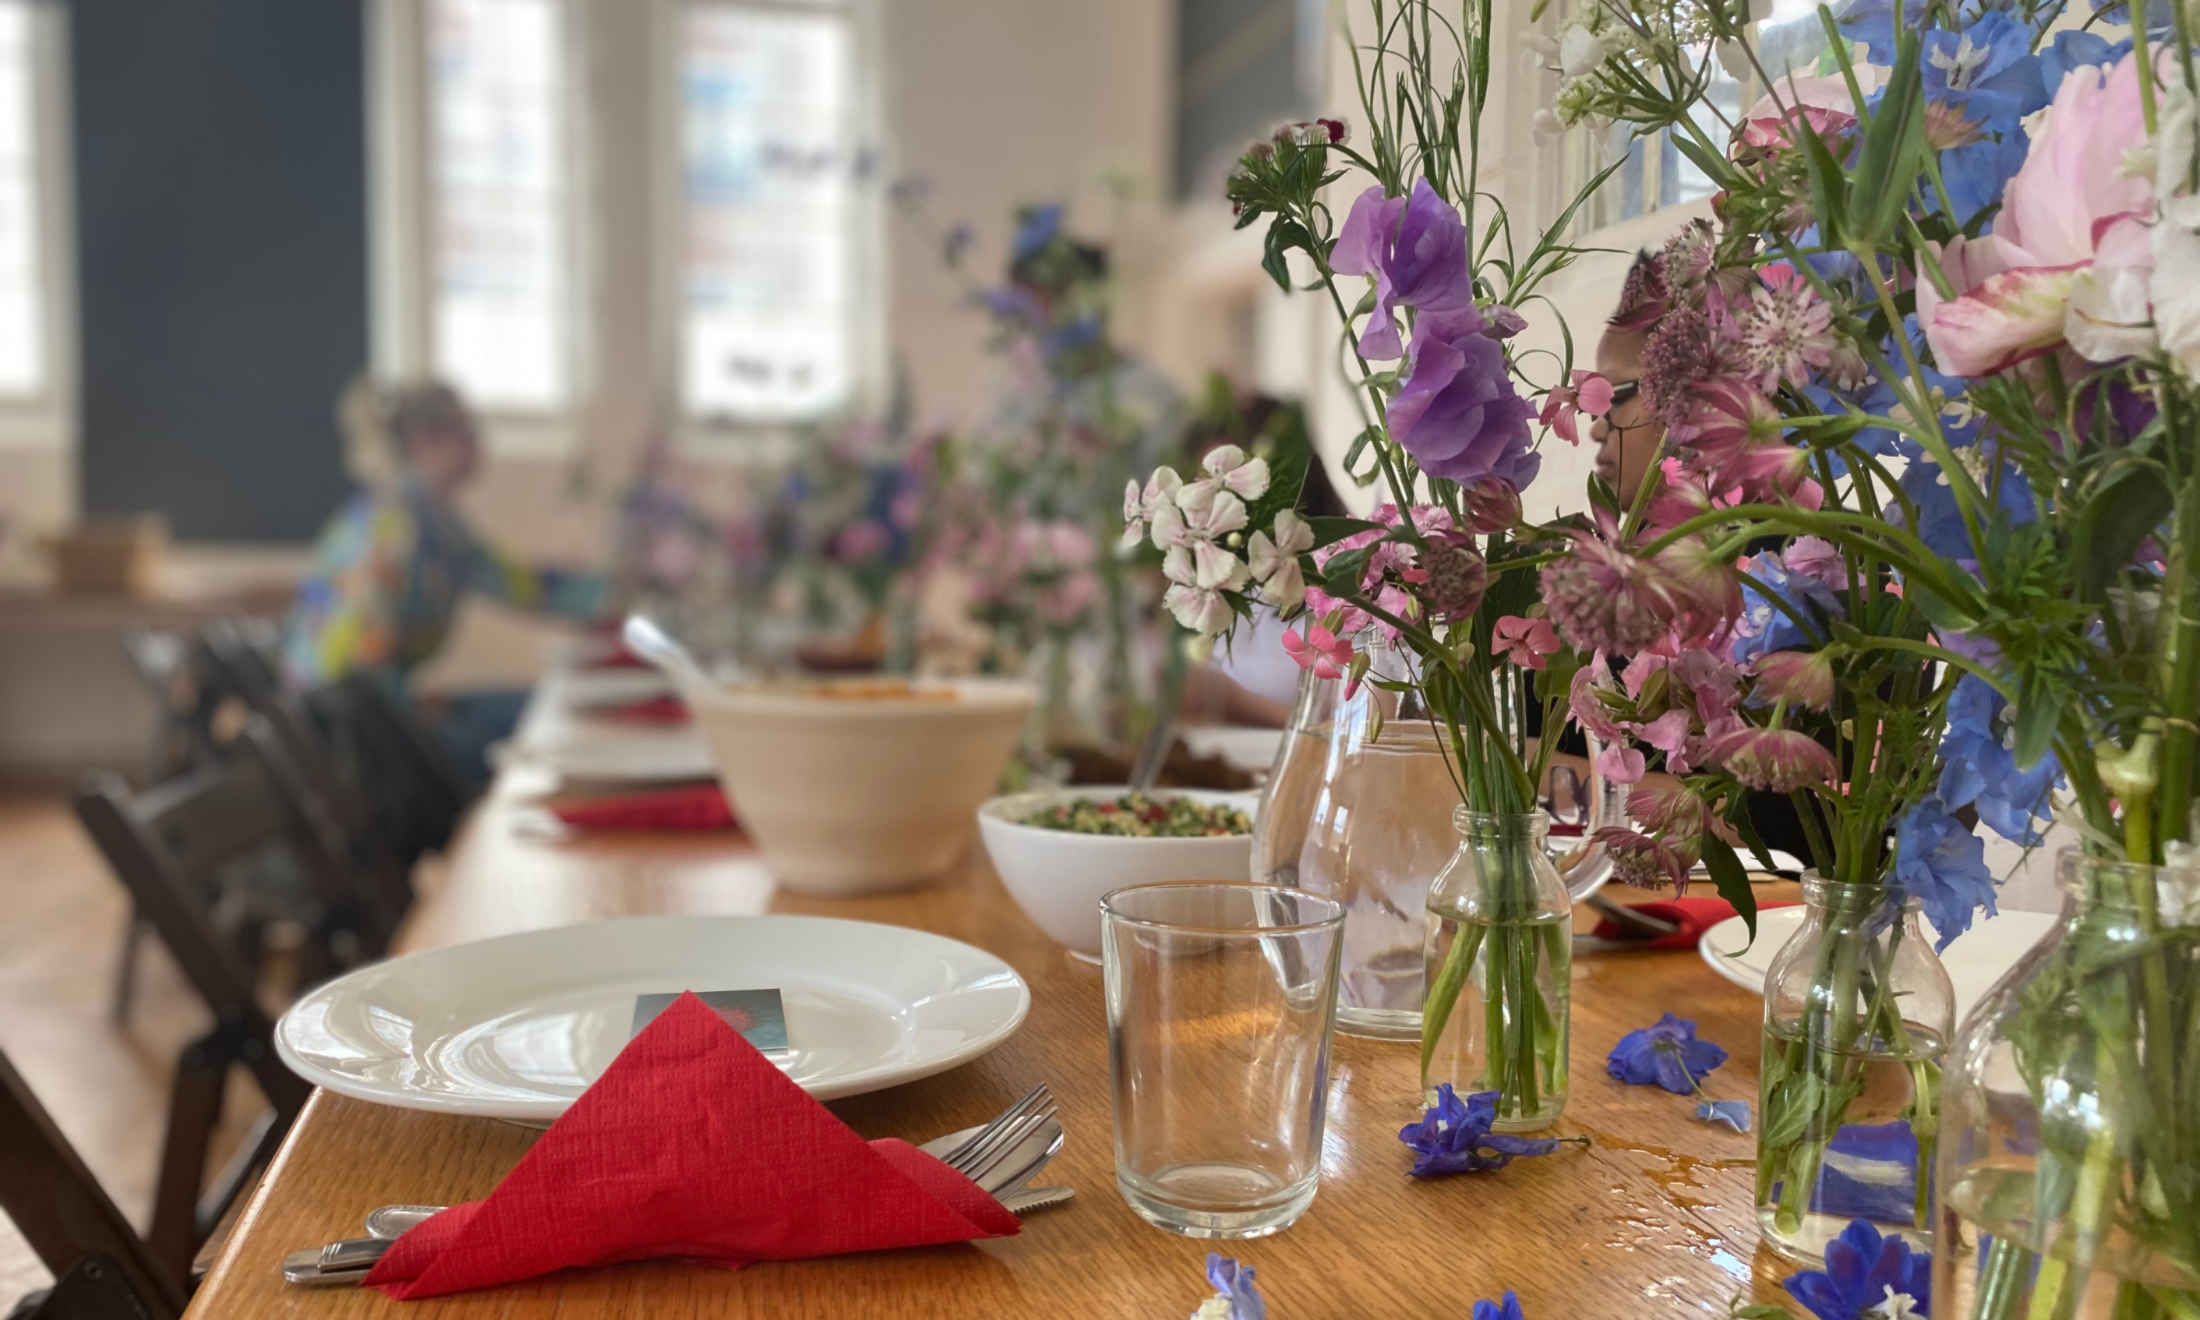 Cultivating hope: how this charity is using floristry to help asylum-seeking women flourish